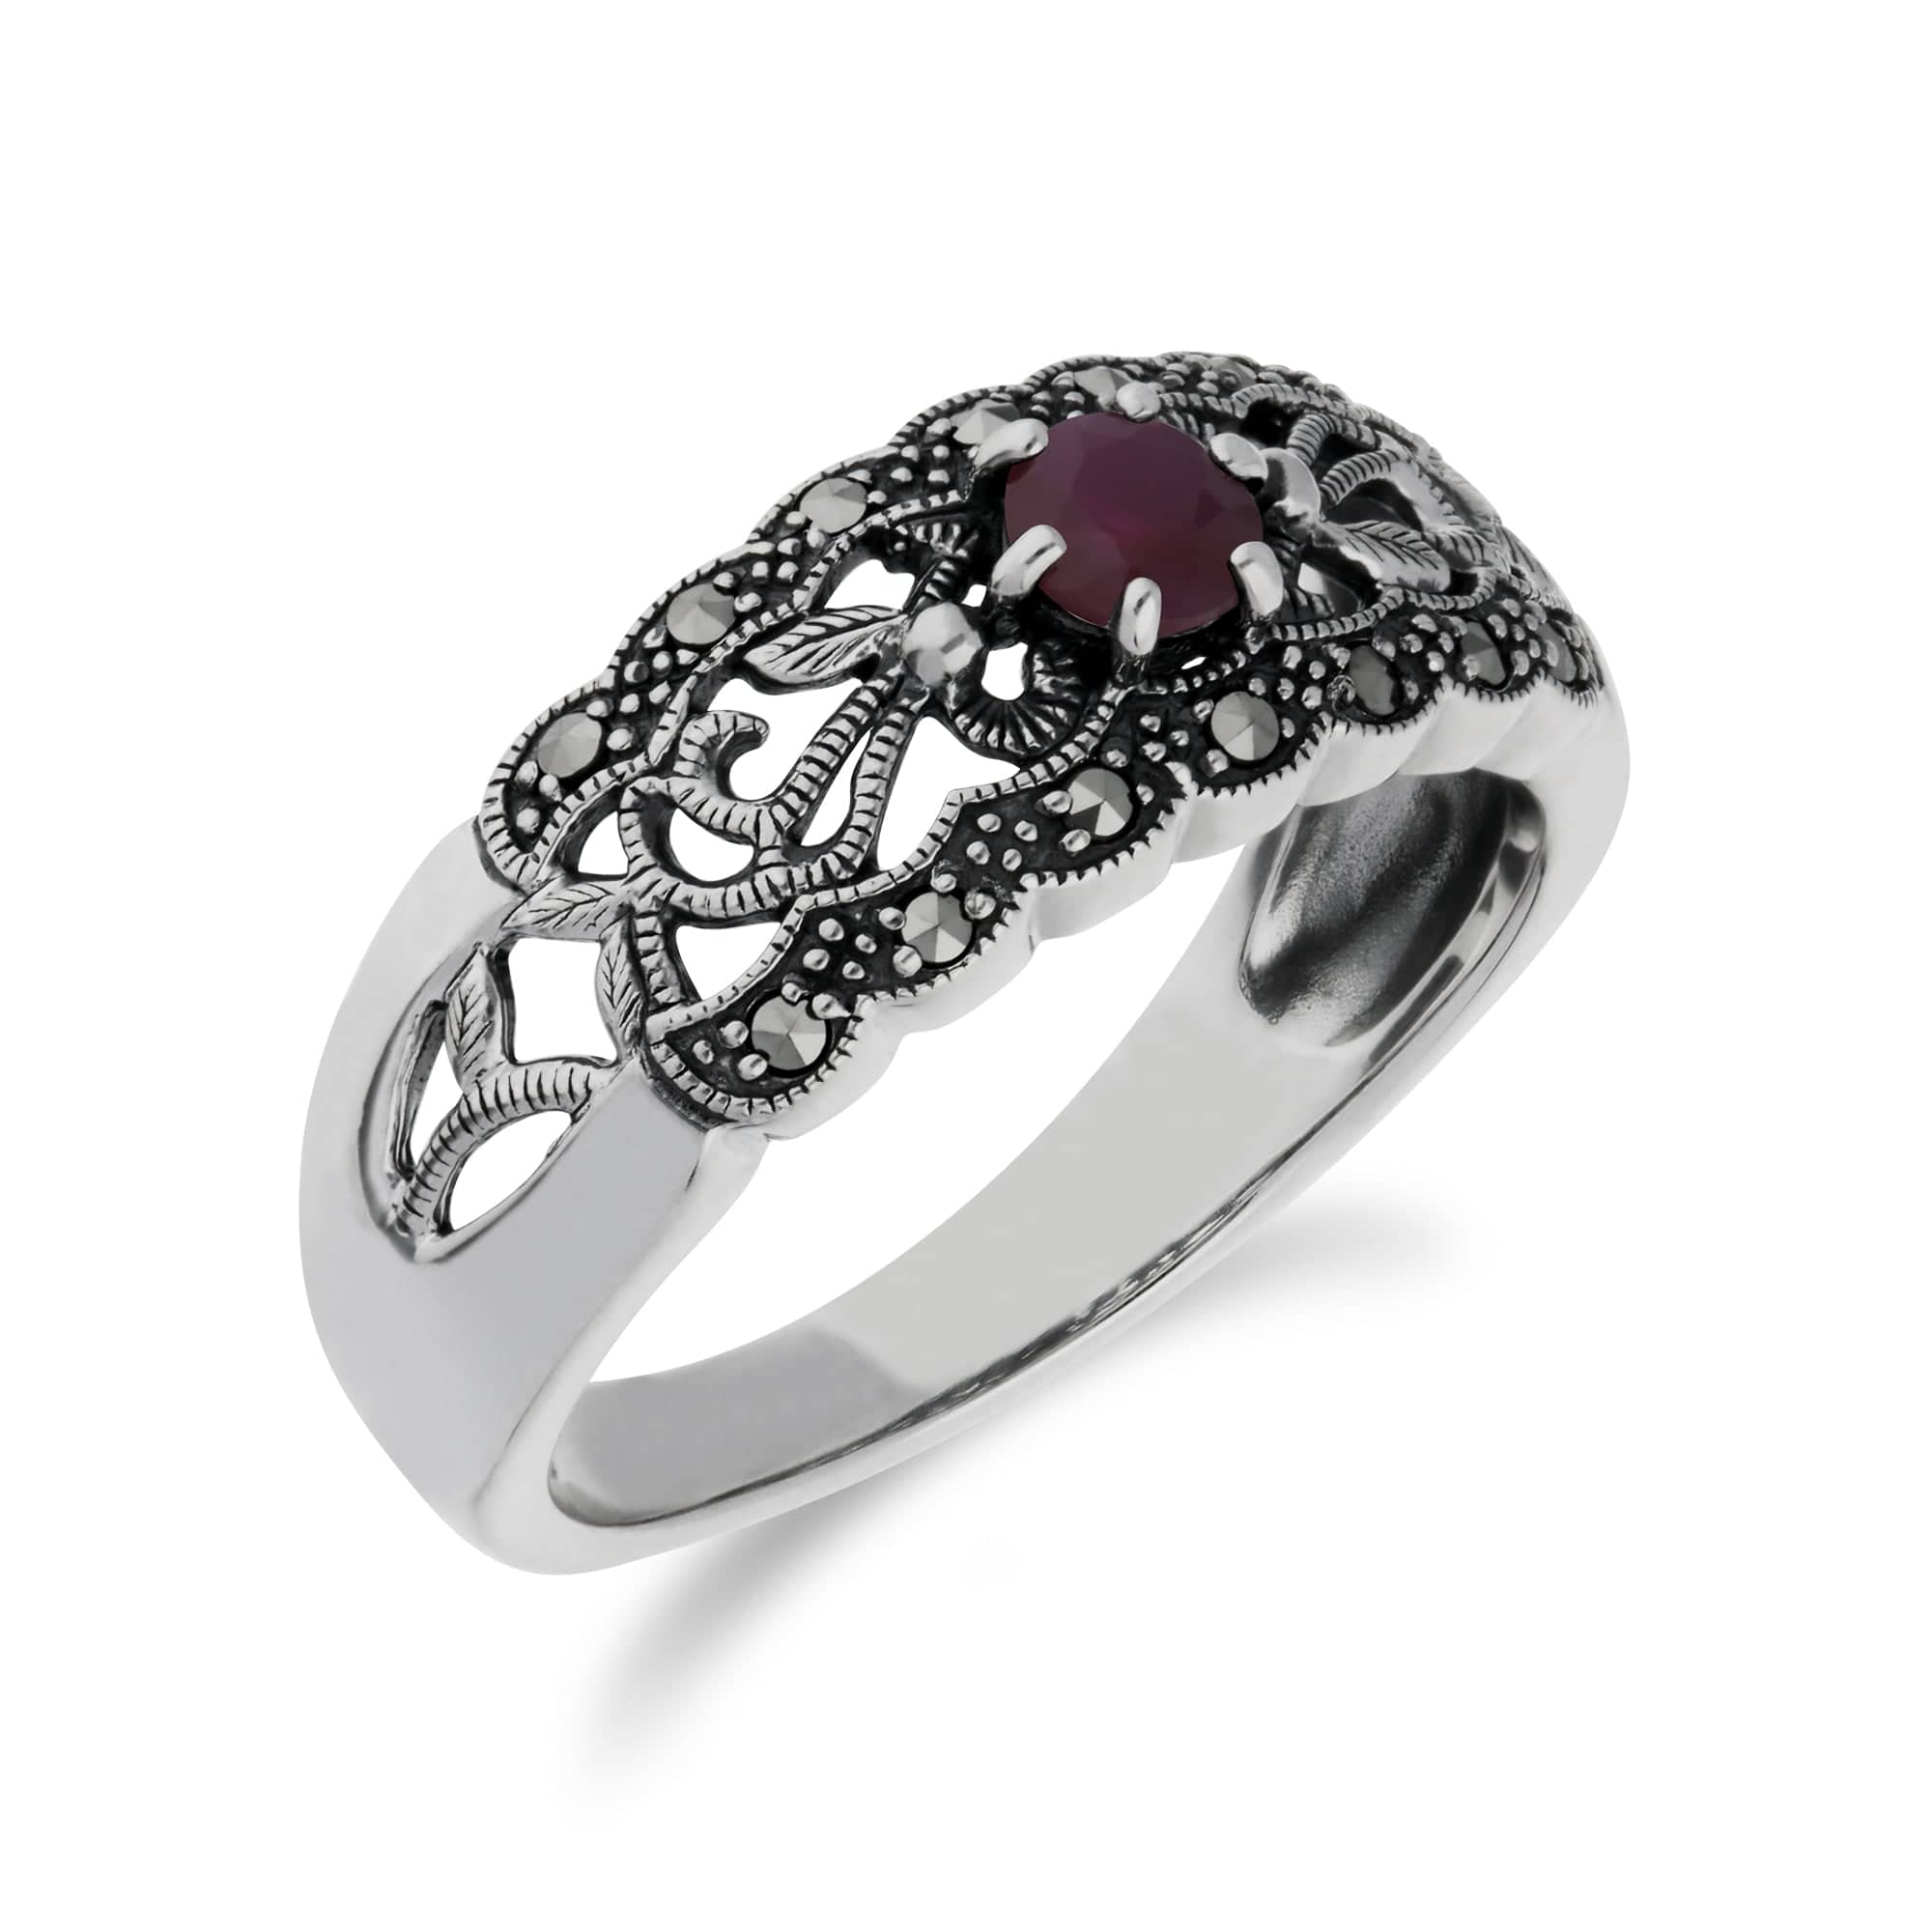 214R597705925 Art Nouveau Style Round Ruby & Marcasite Floral Band Ring in Sterling Silver 3